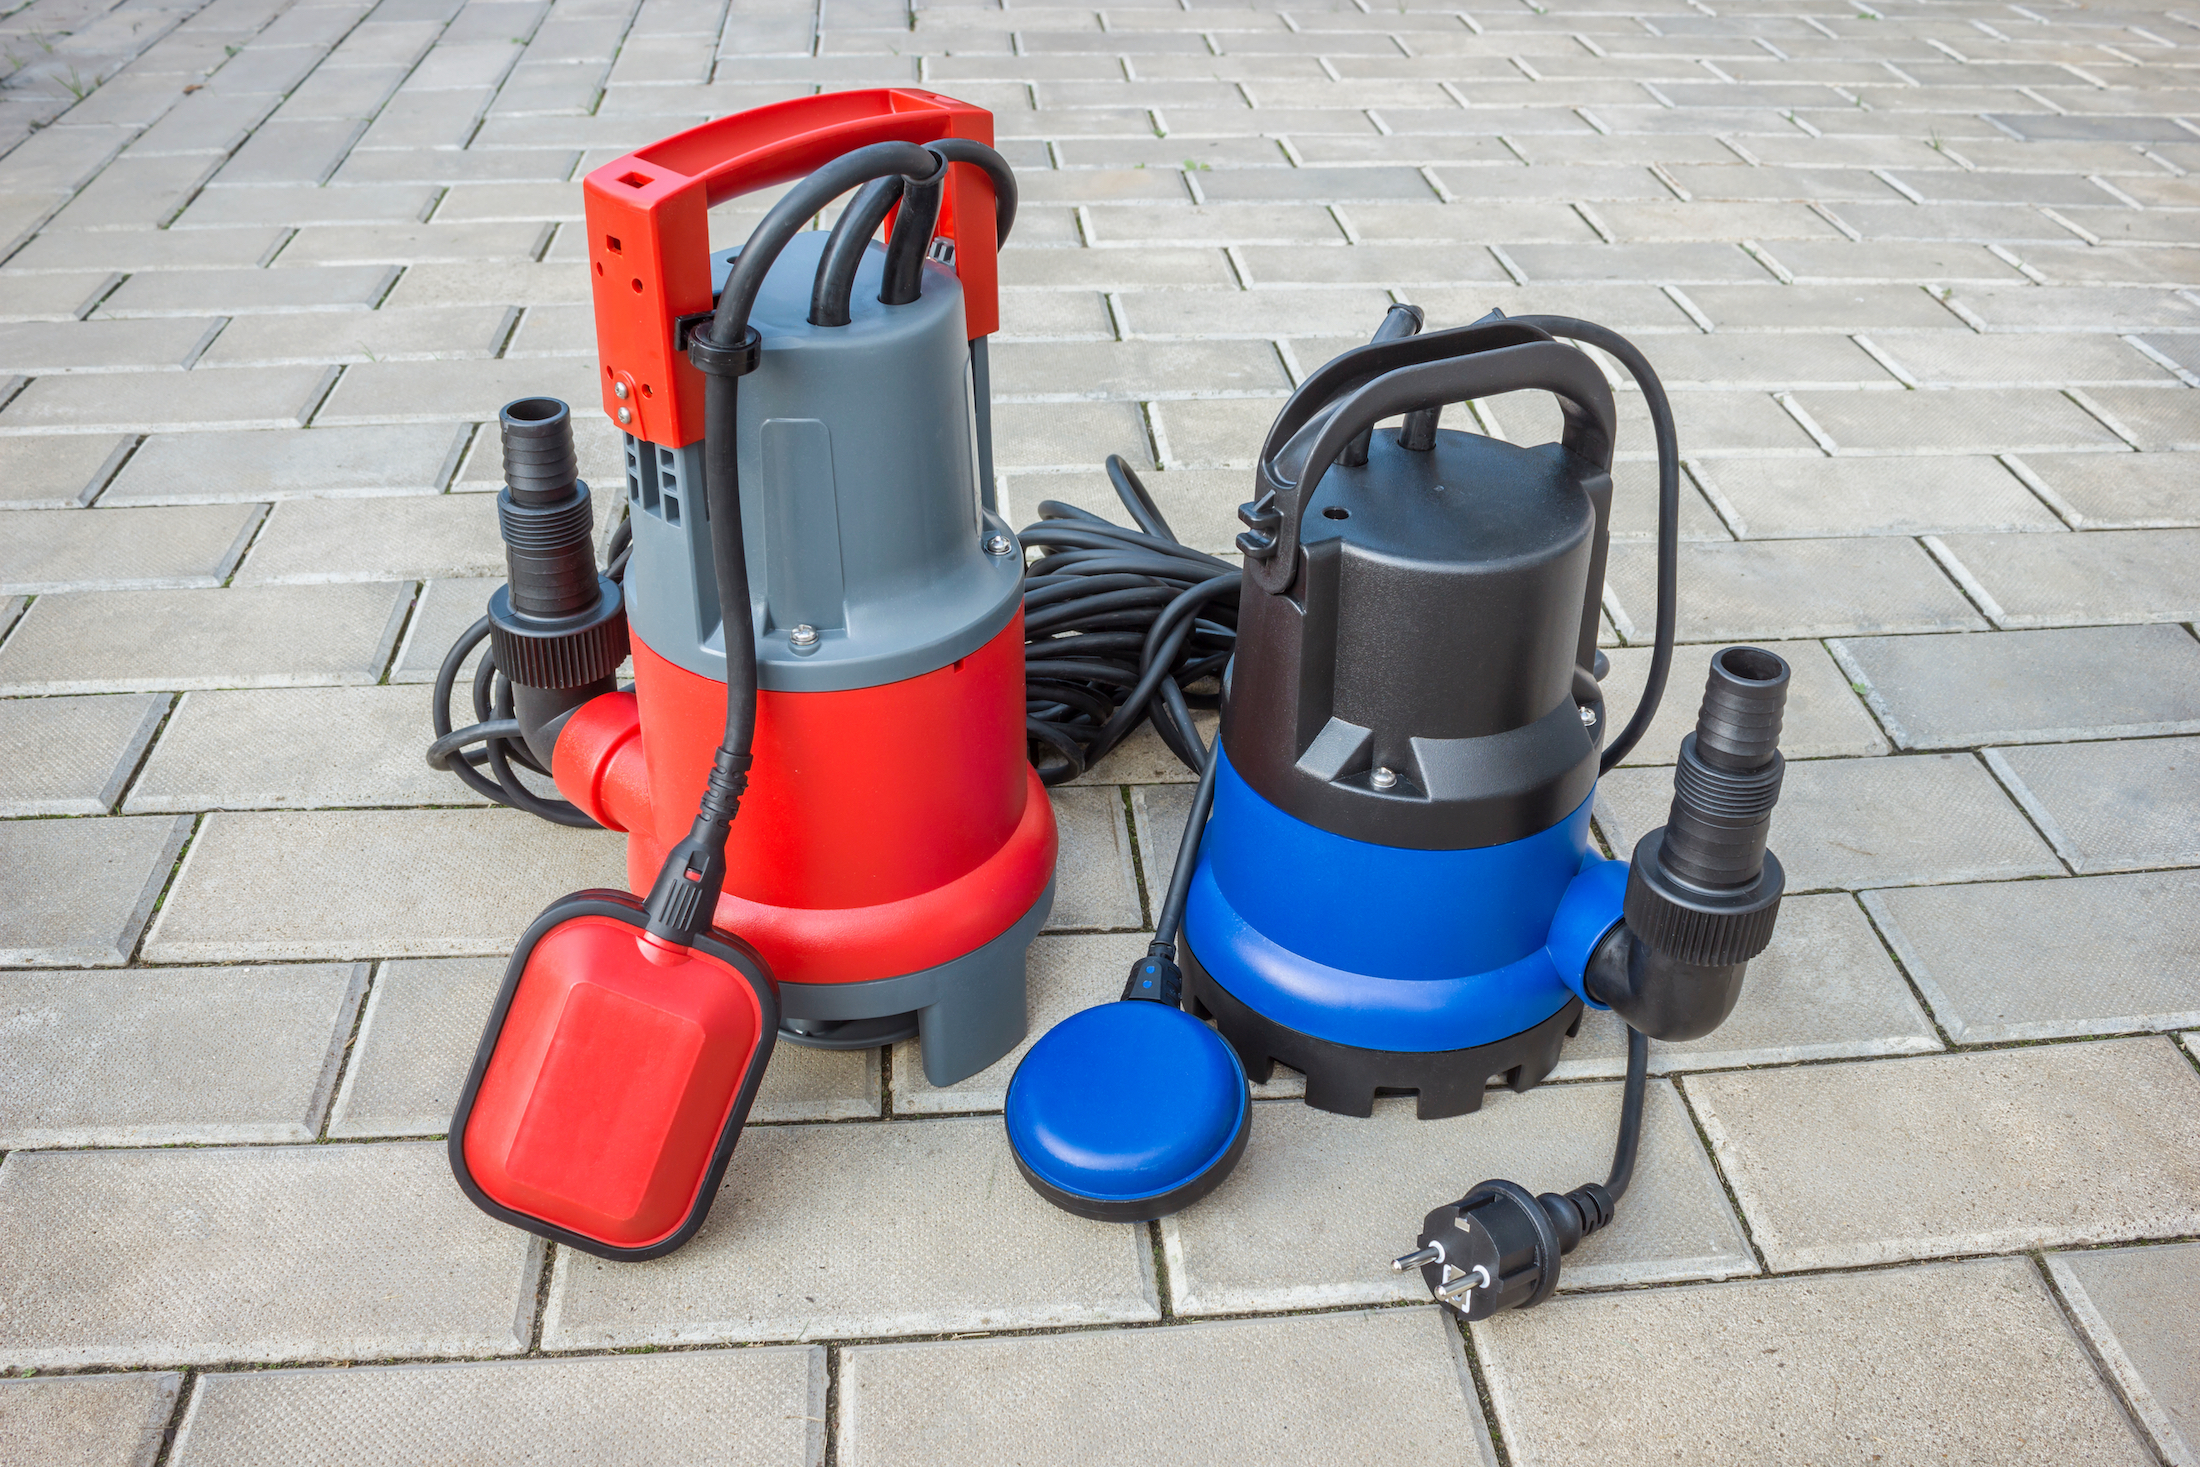 A red and blue household submersible pump sitting on a stone floor